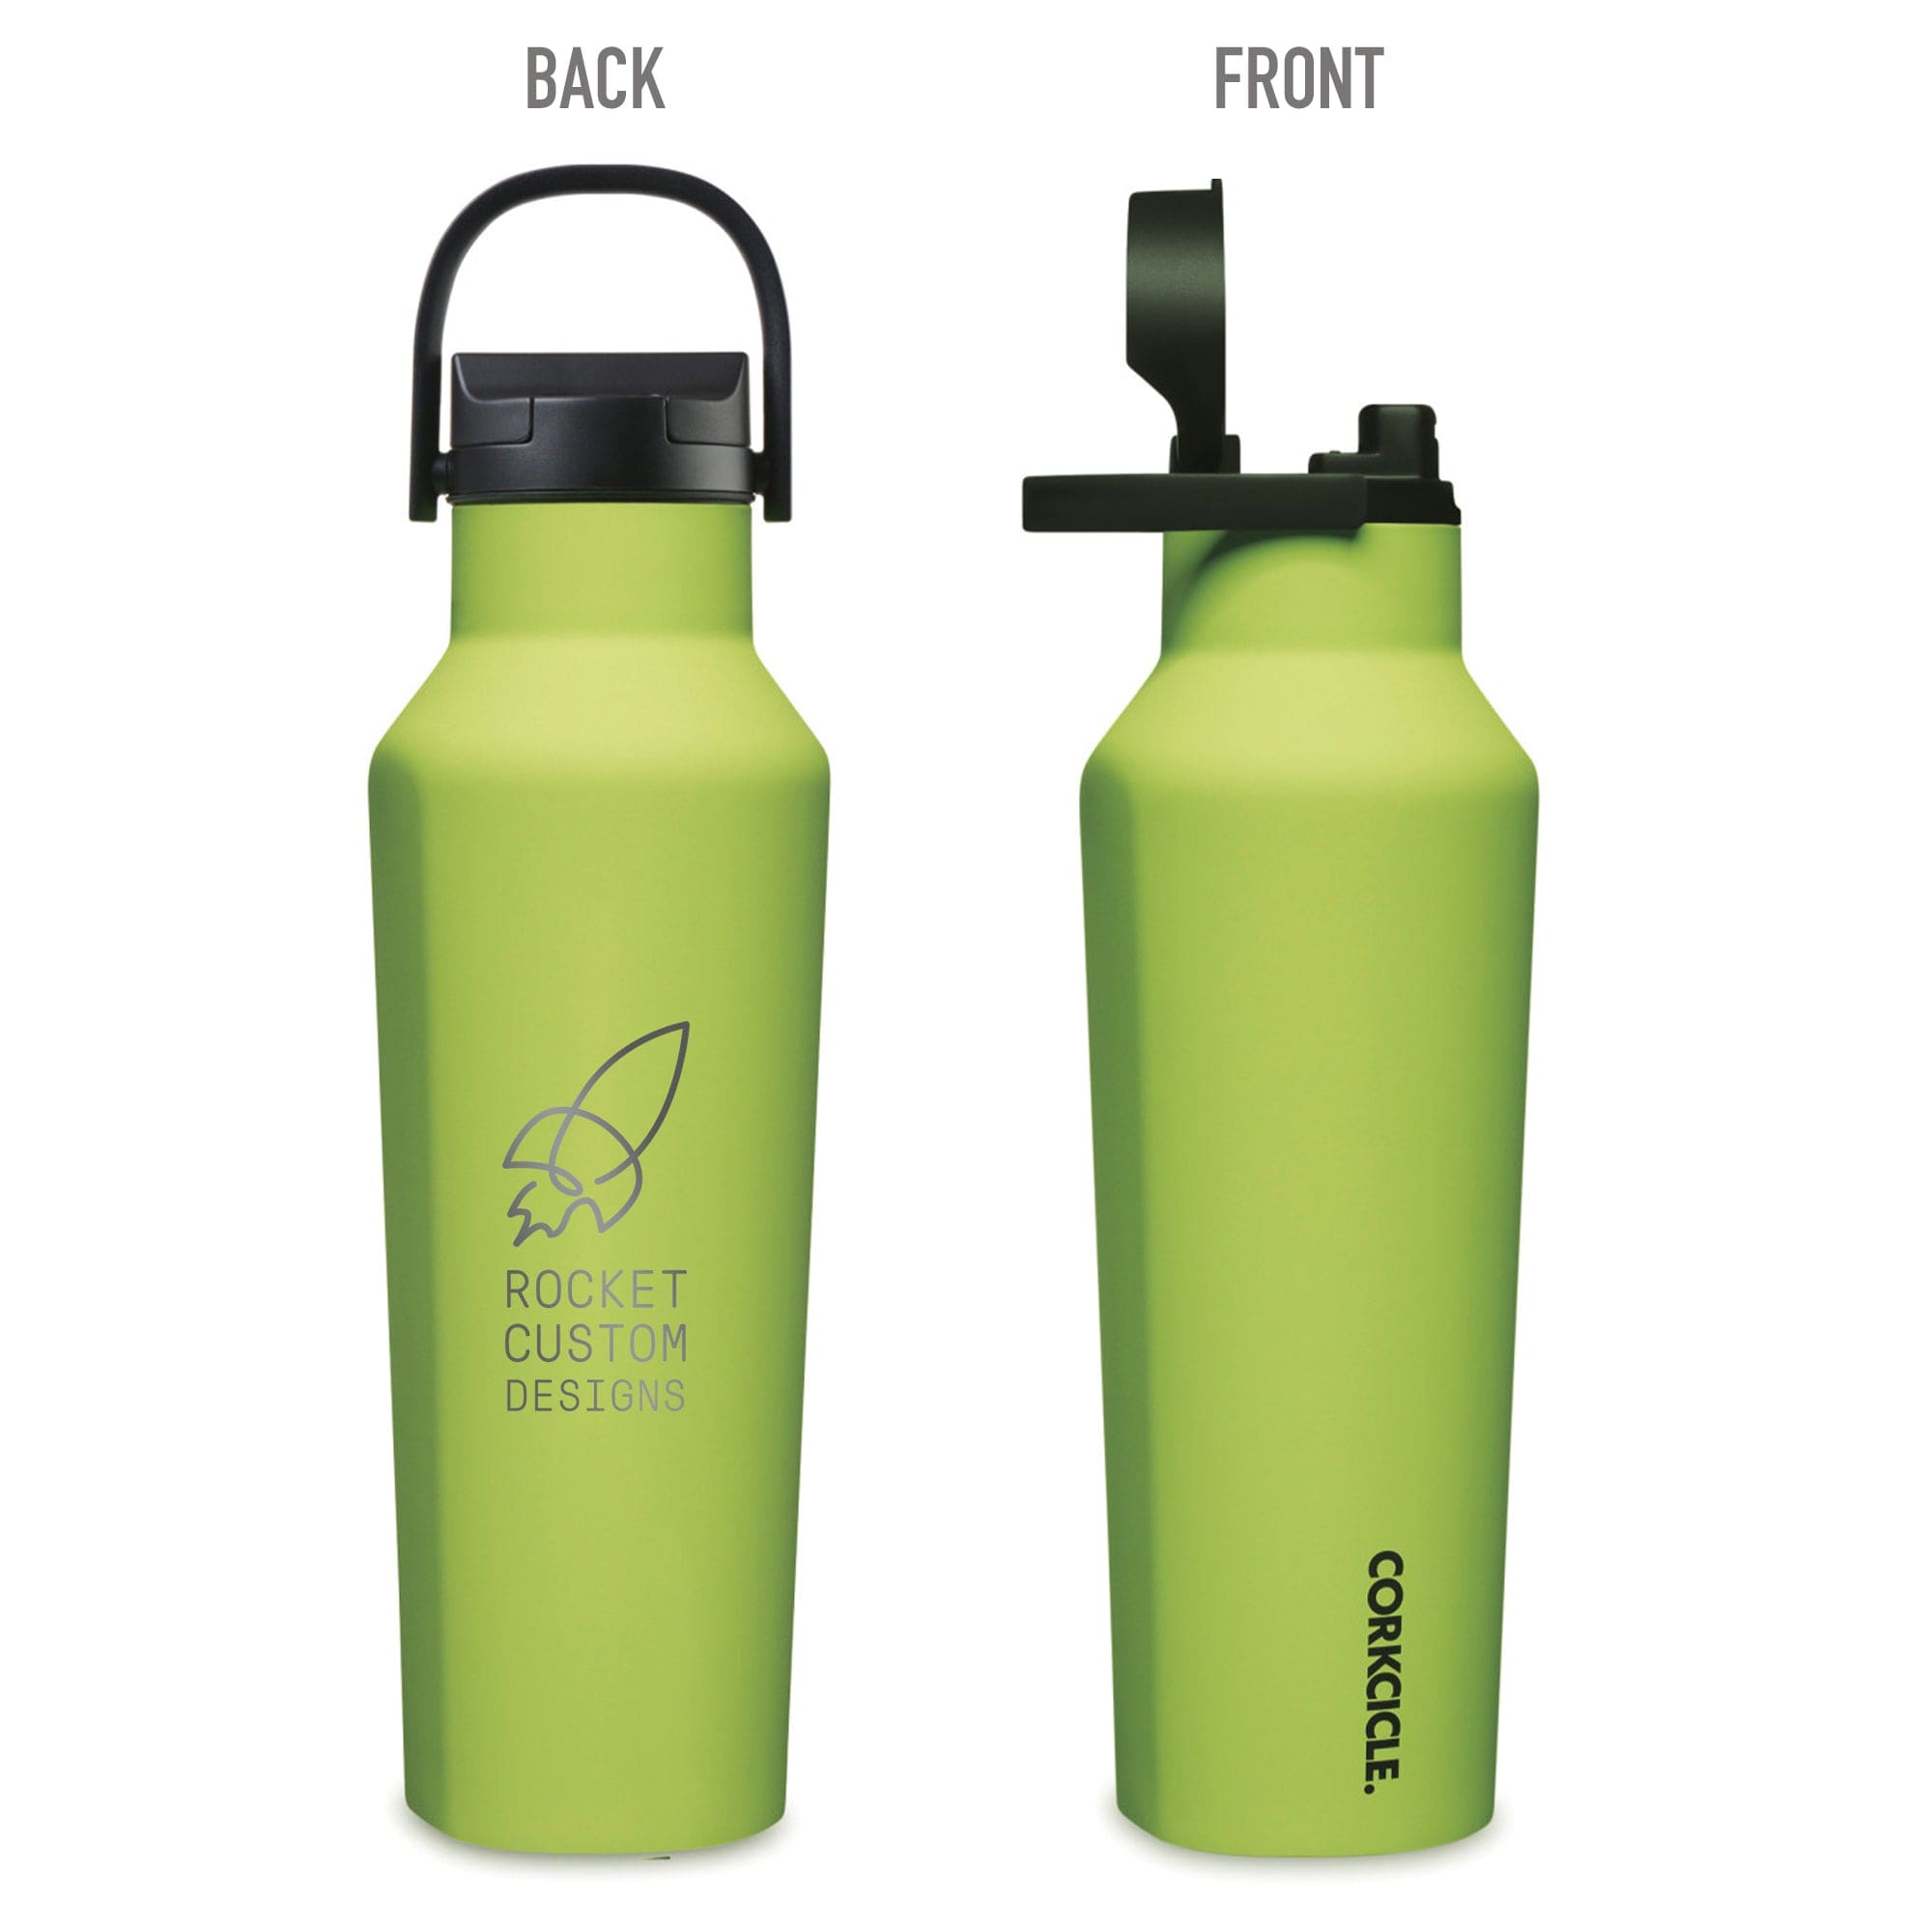 Corkcicle Cold Cup 24 Oz.